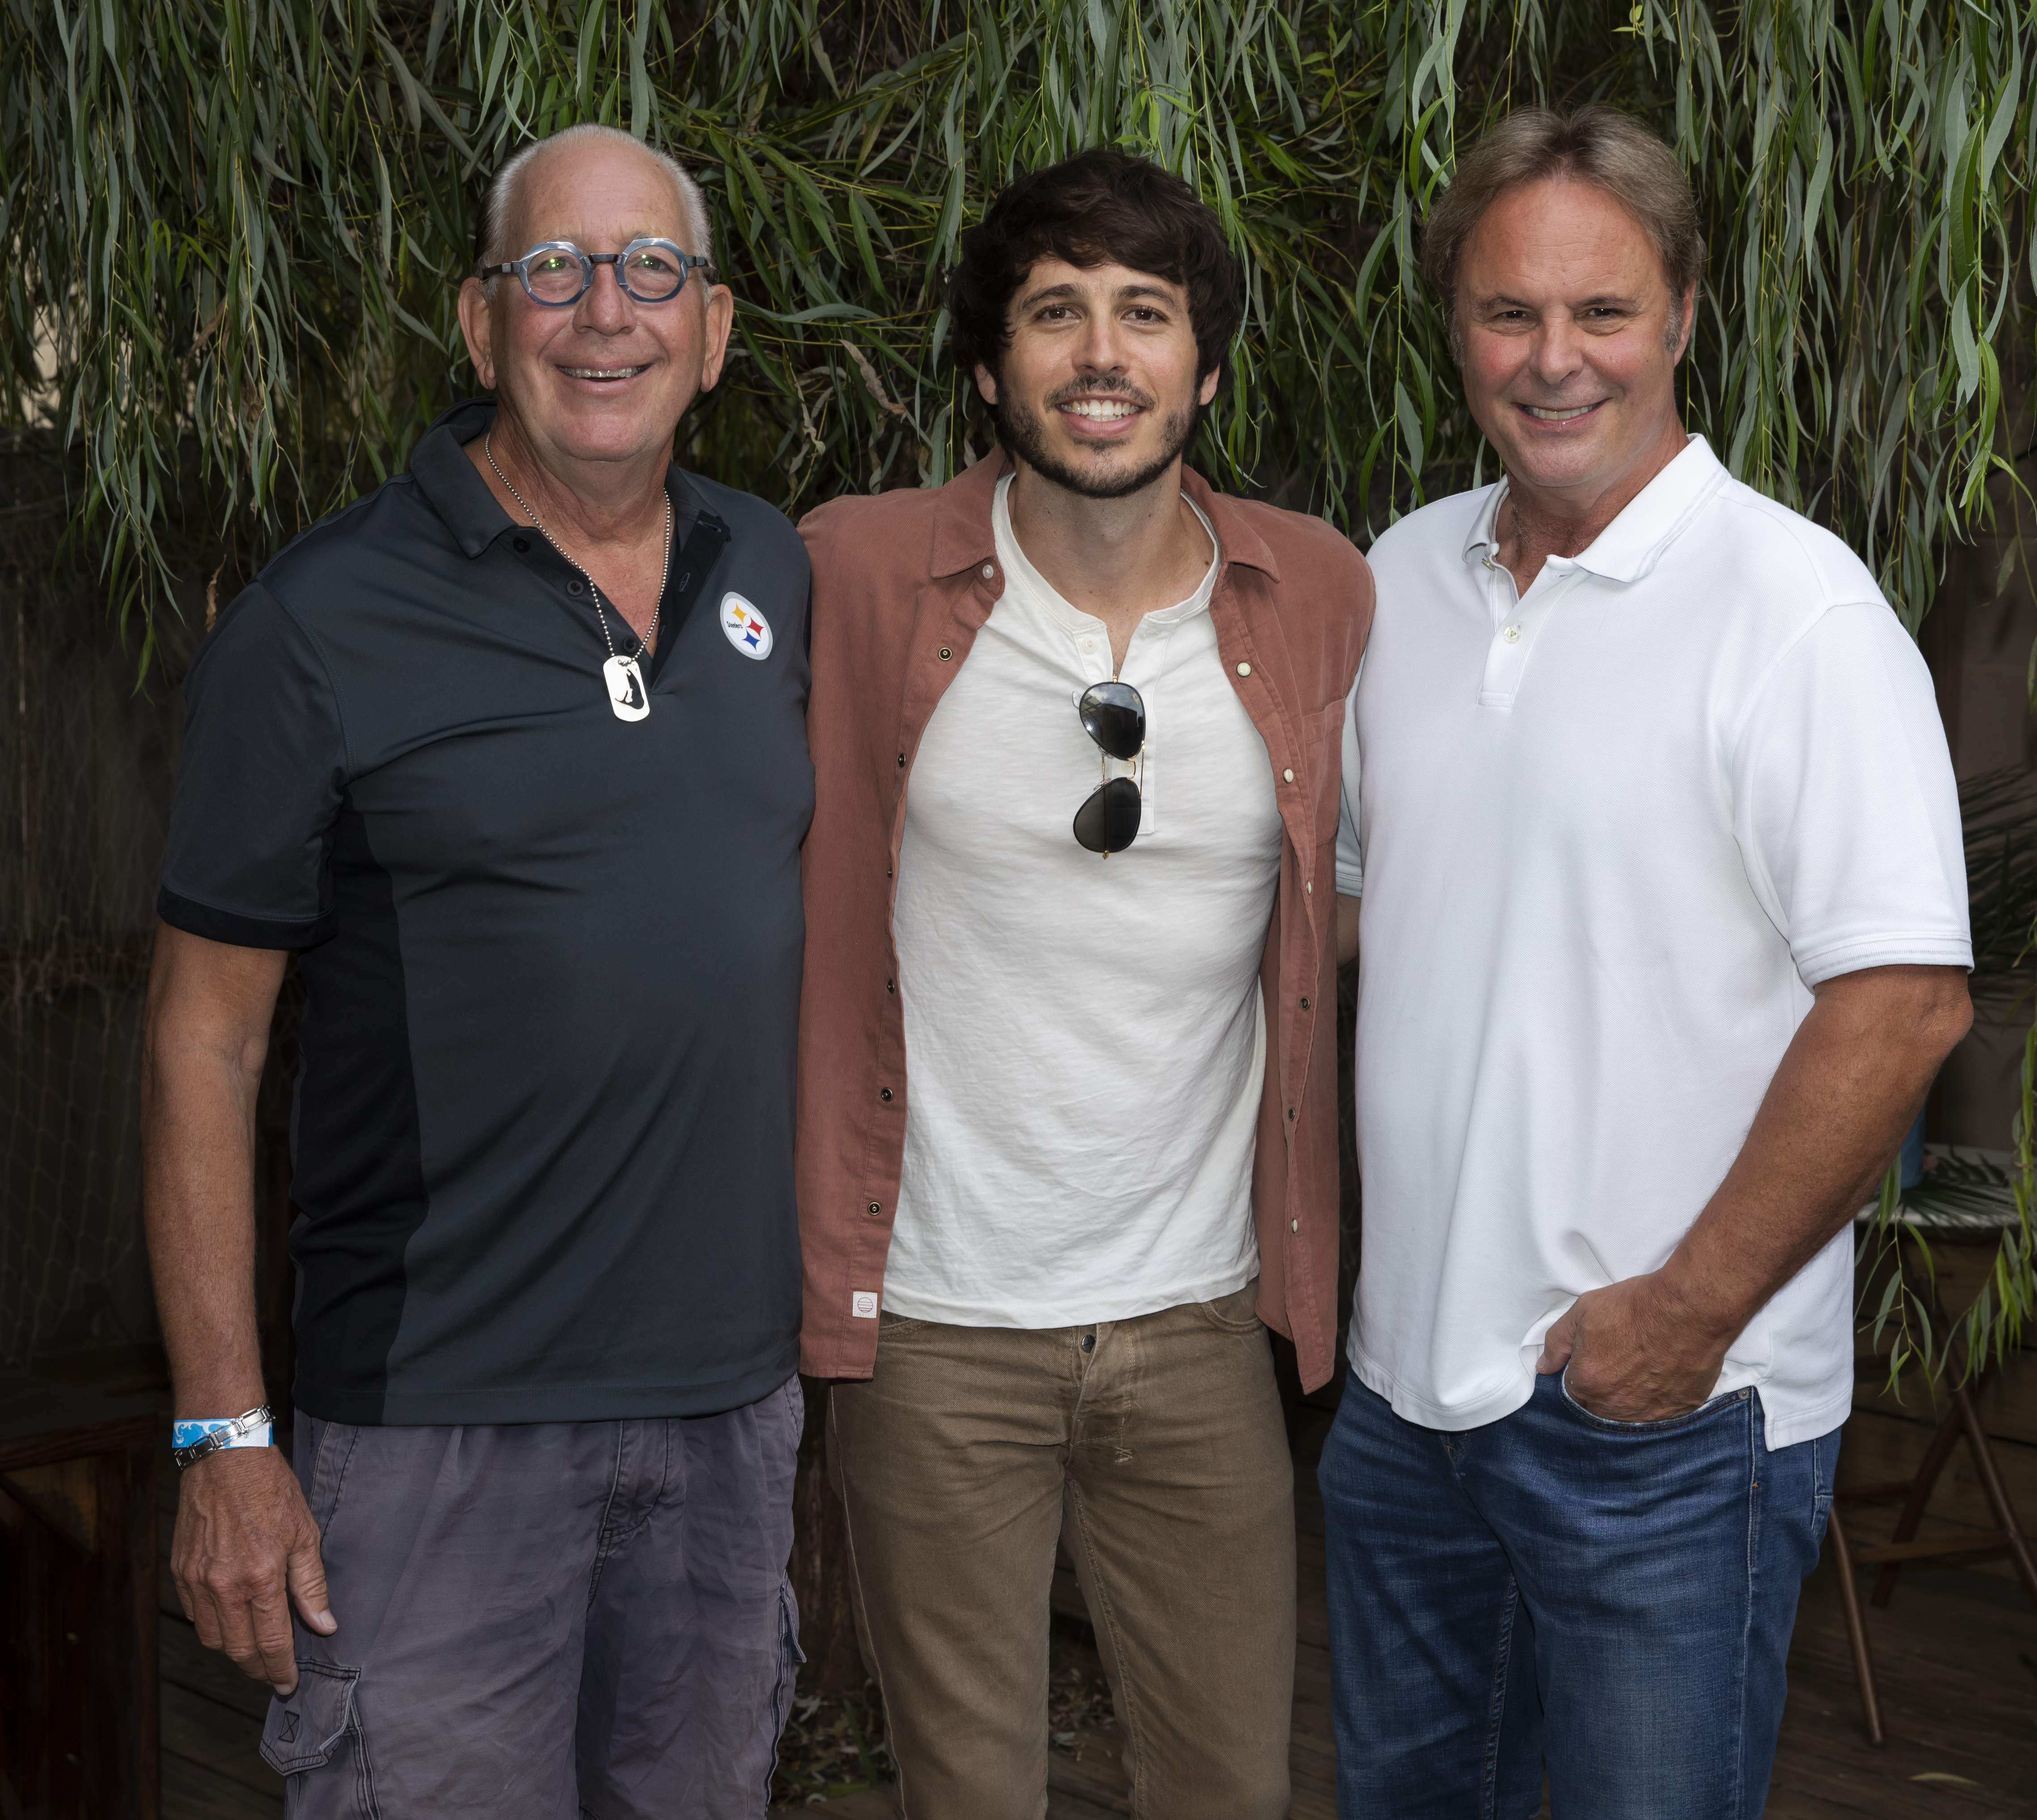 MORGAN EVANS KICKS OFF THE 'GOOD DAY TOUR' WITH BRETT ELDREDGE TONIGHT IN CLEVELAND, OH